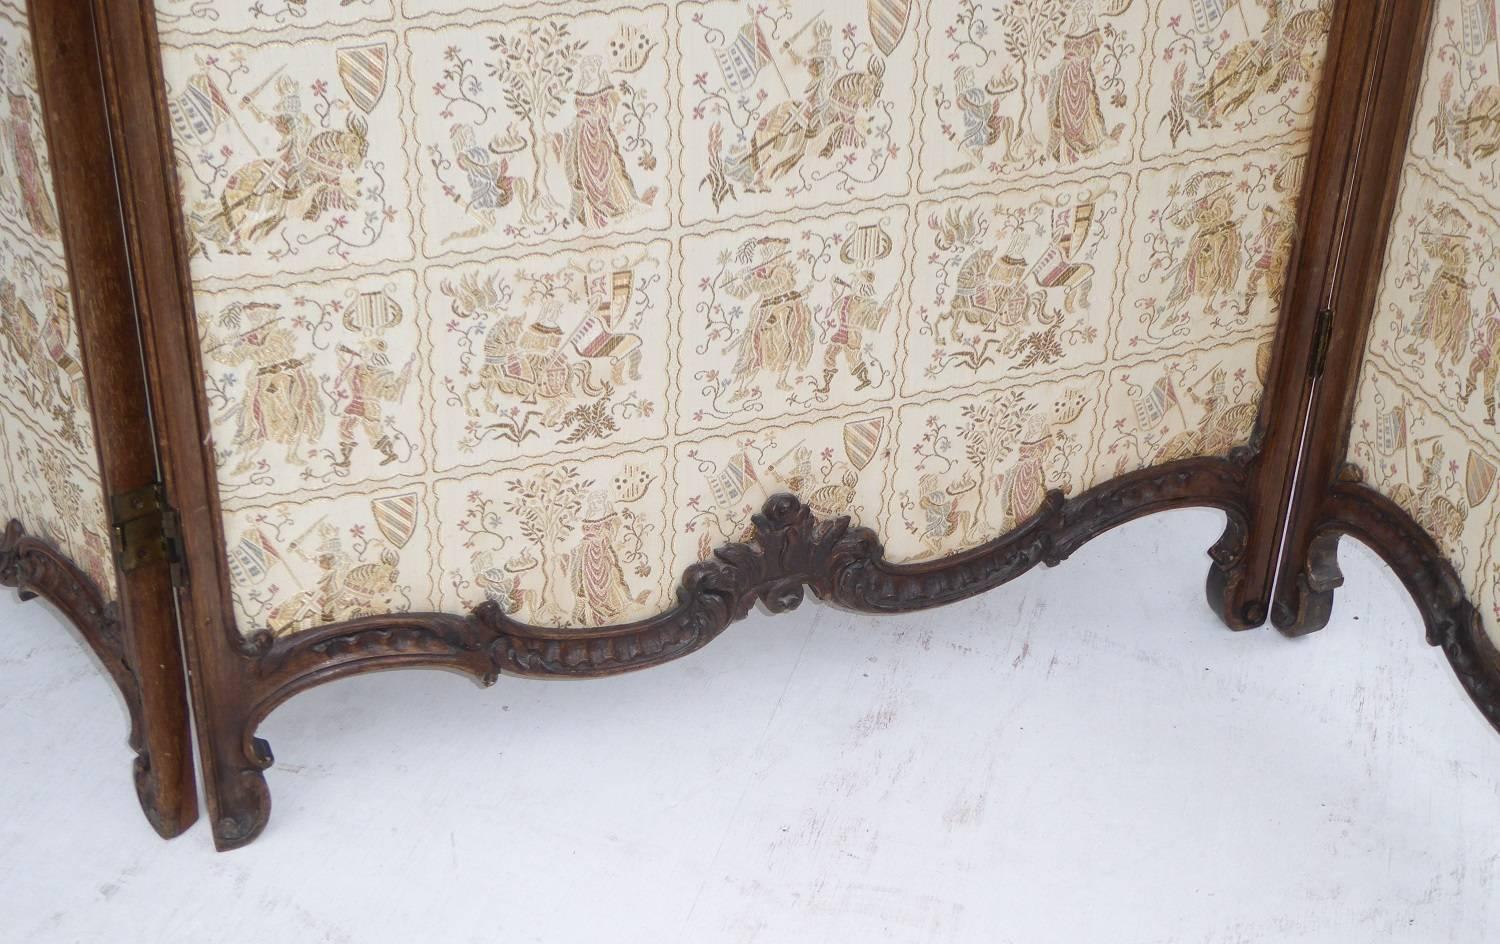 For sale is a good quality 19th century French dressing screen. The screen is ornately shaped and carved at the top, above three glass panels with further carving below. Under this the screen is upholstered and stands on shaped feet. Overall, this